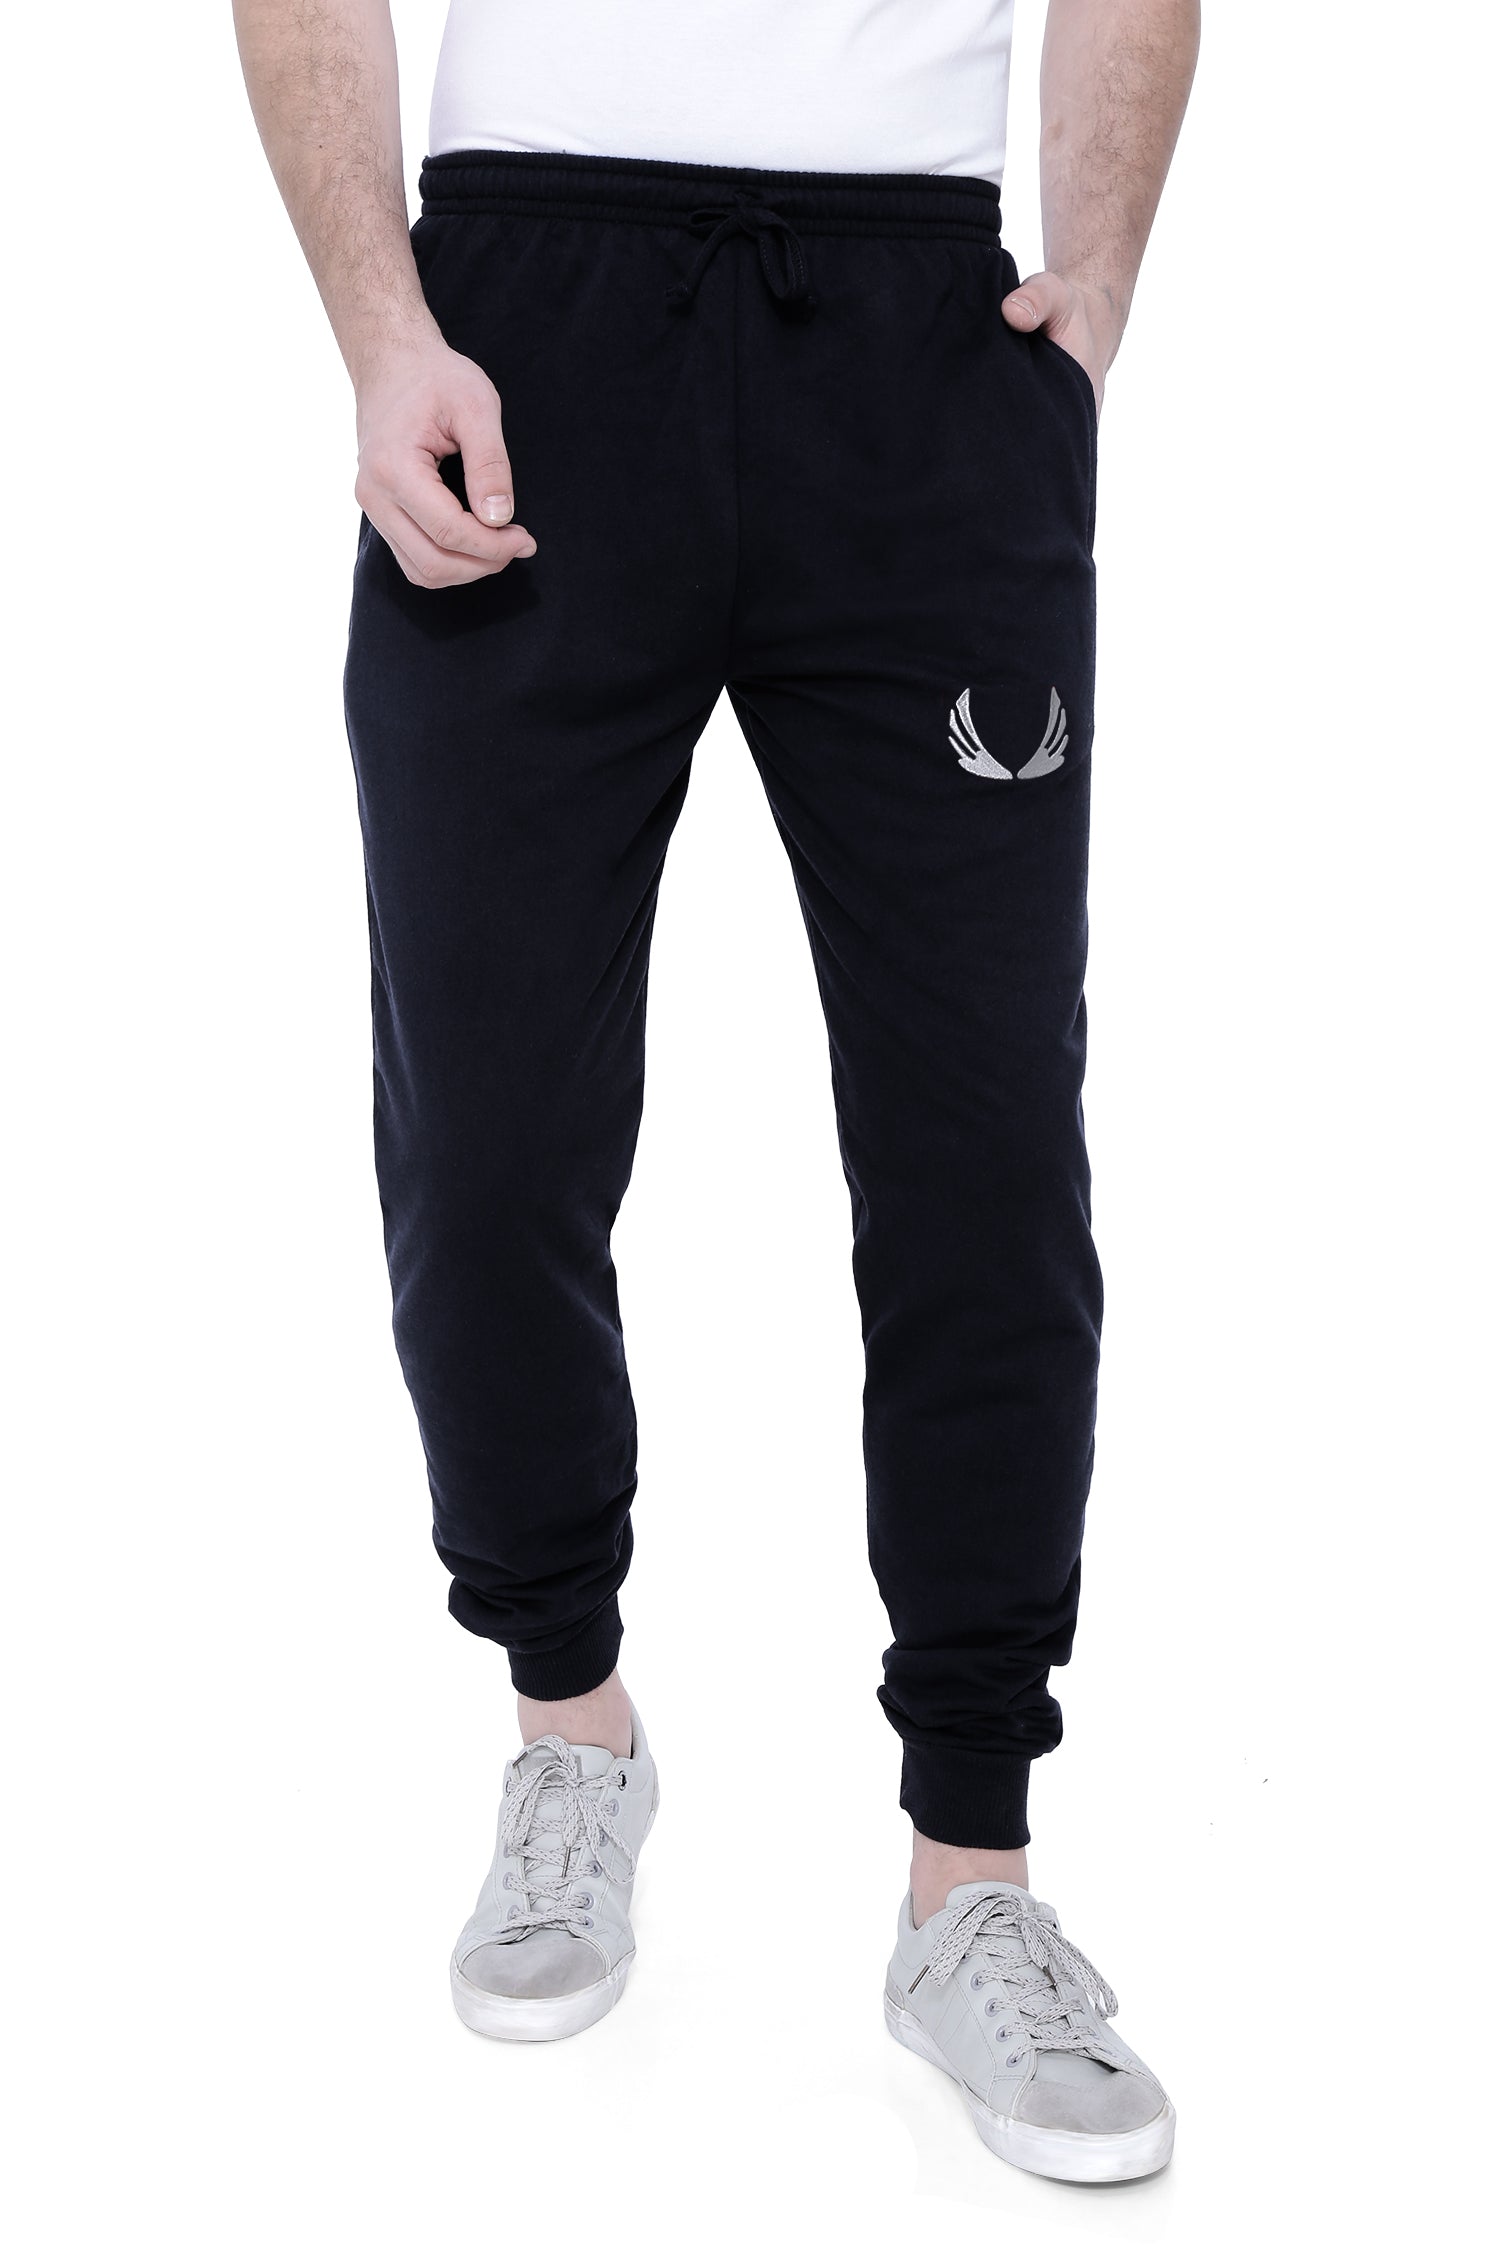 Cotton Joggers - Buy Cotton Joggers Online | Myntra